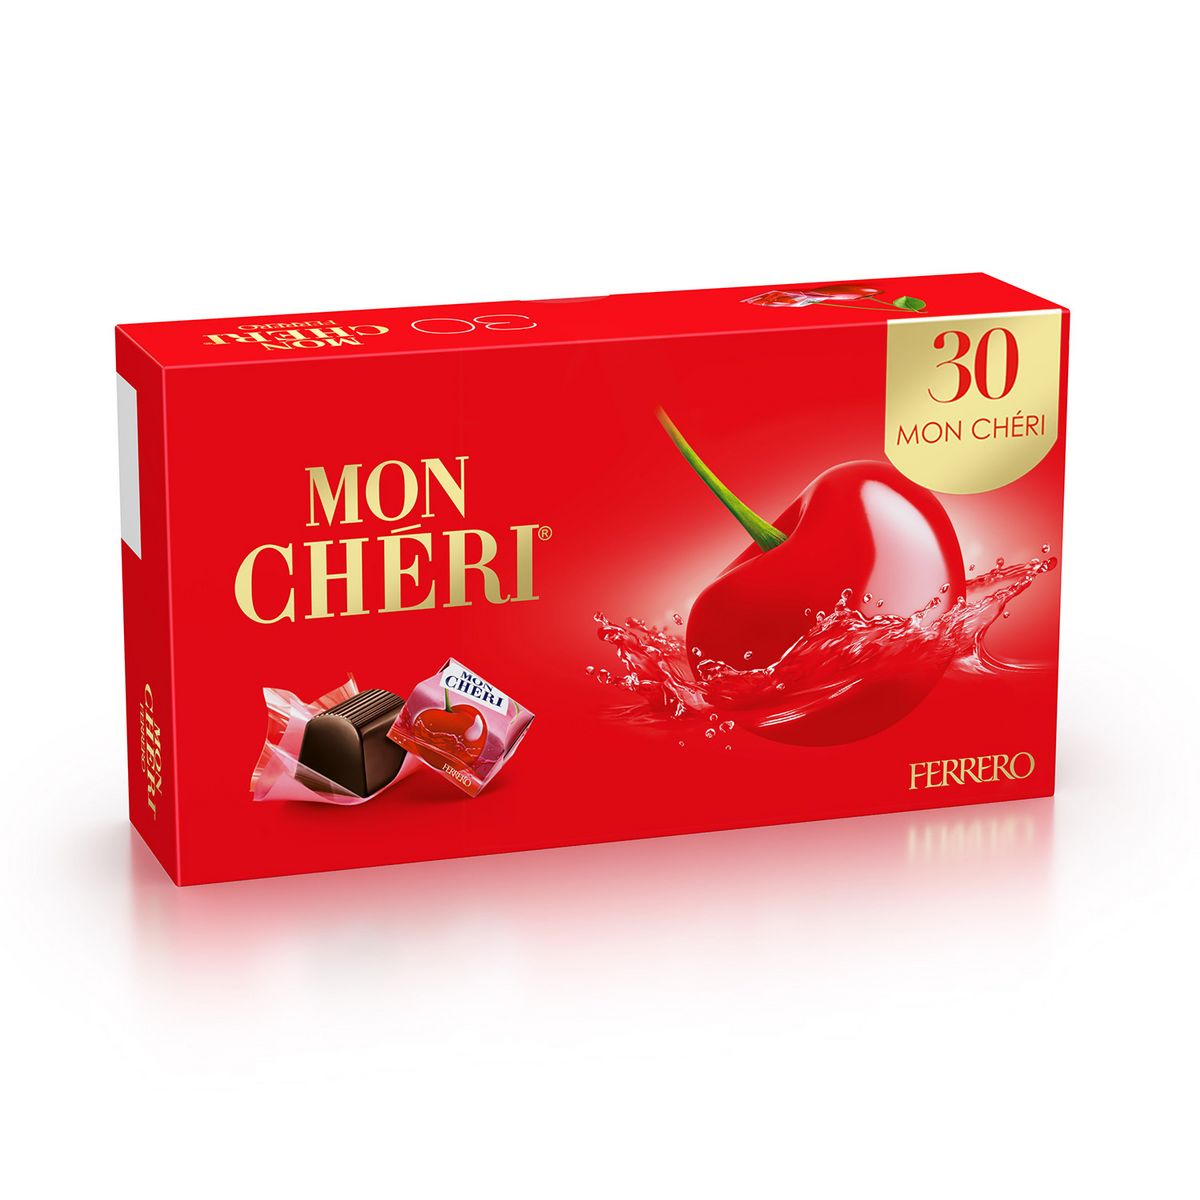 https://my-french-grocery.com/wp-content/uploads/2021/10/MON-CHERI-Fine-chocolates-filled-with-cherry-and-liqueur.jpeg